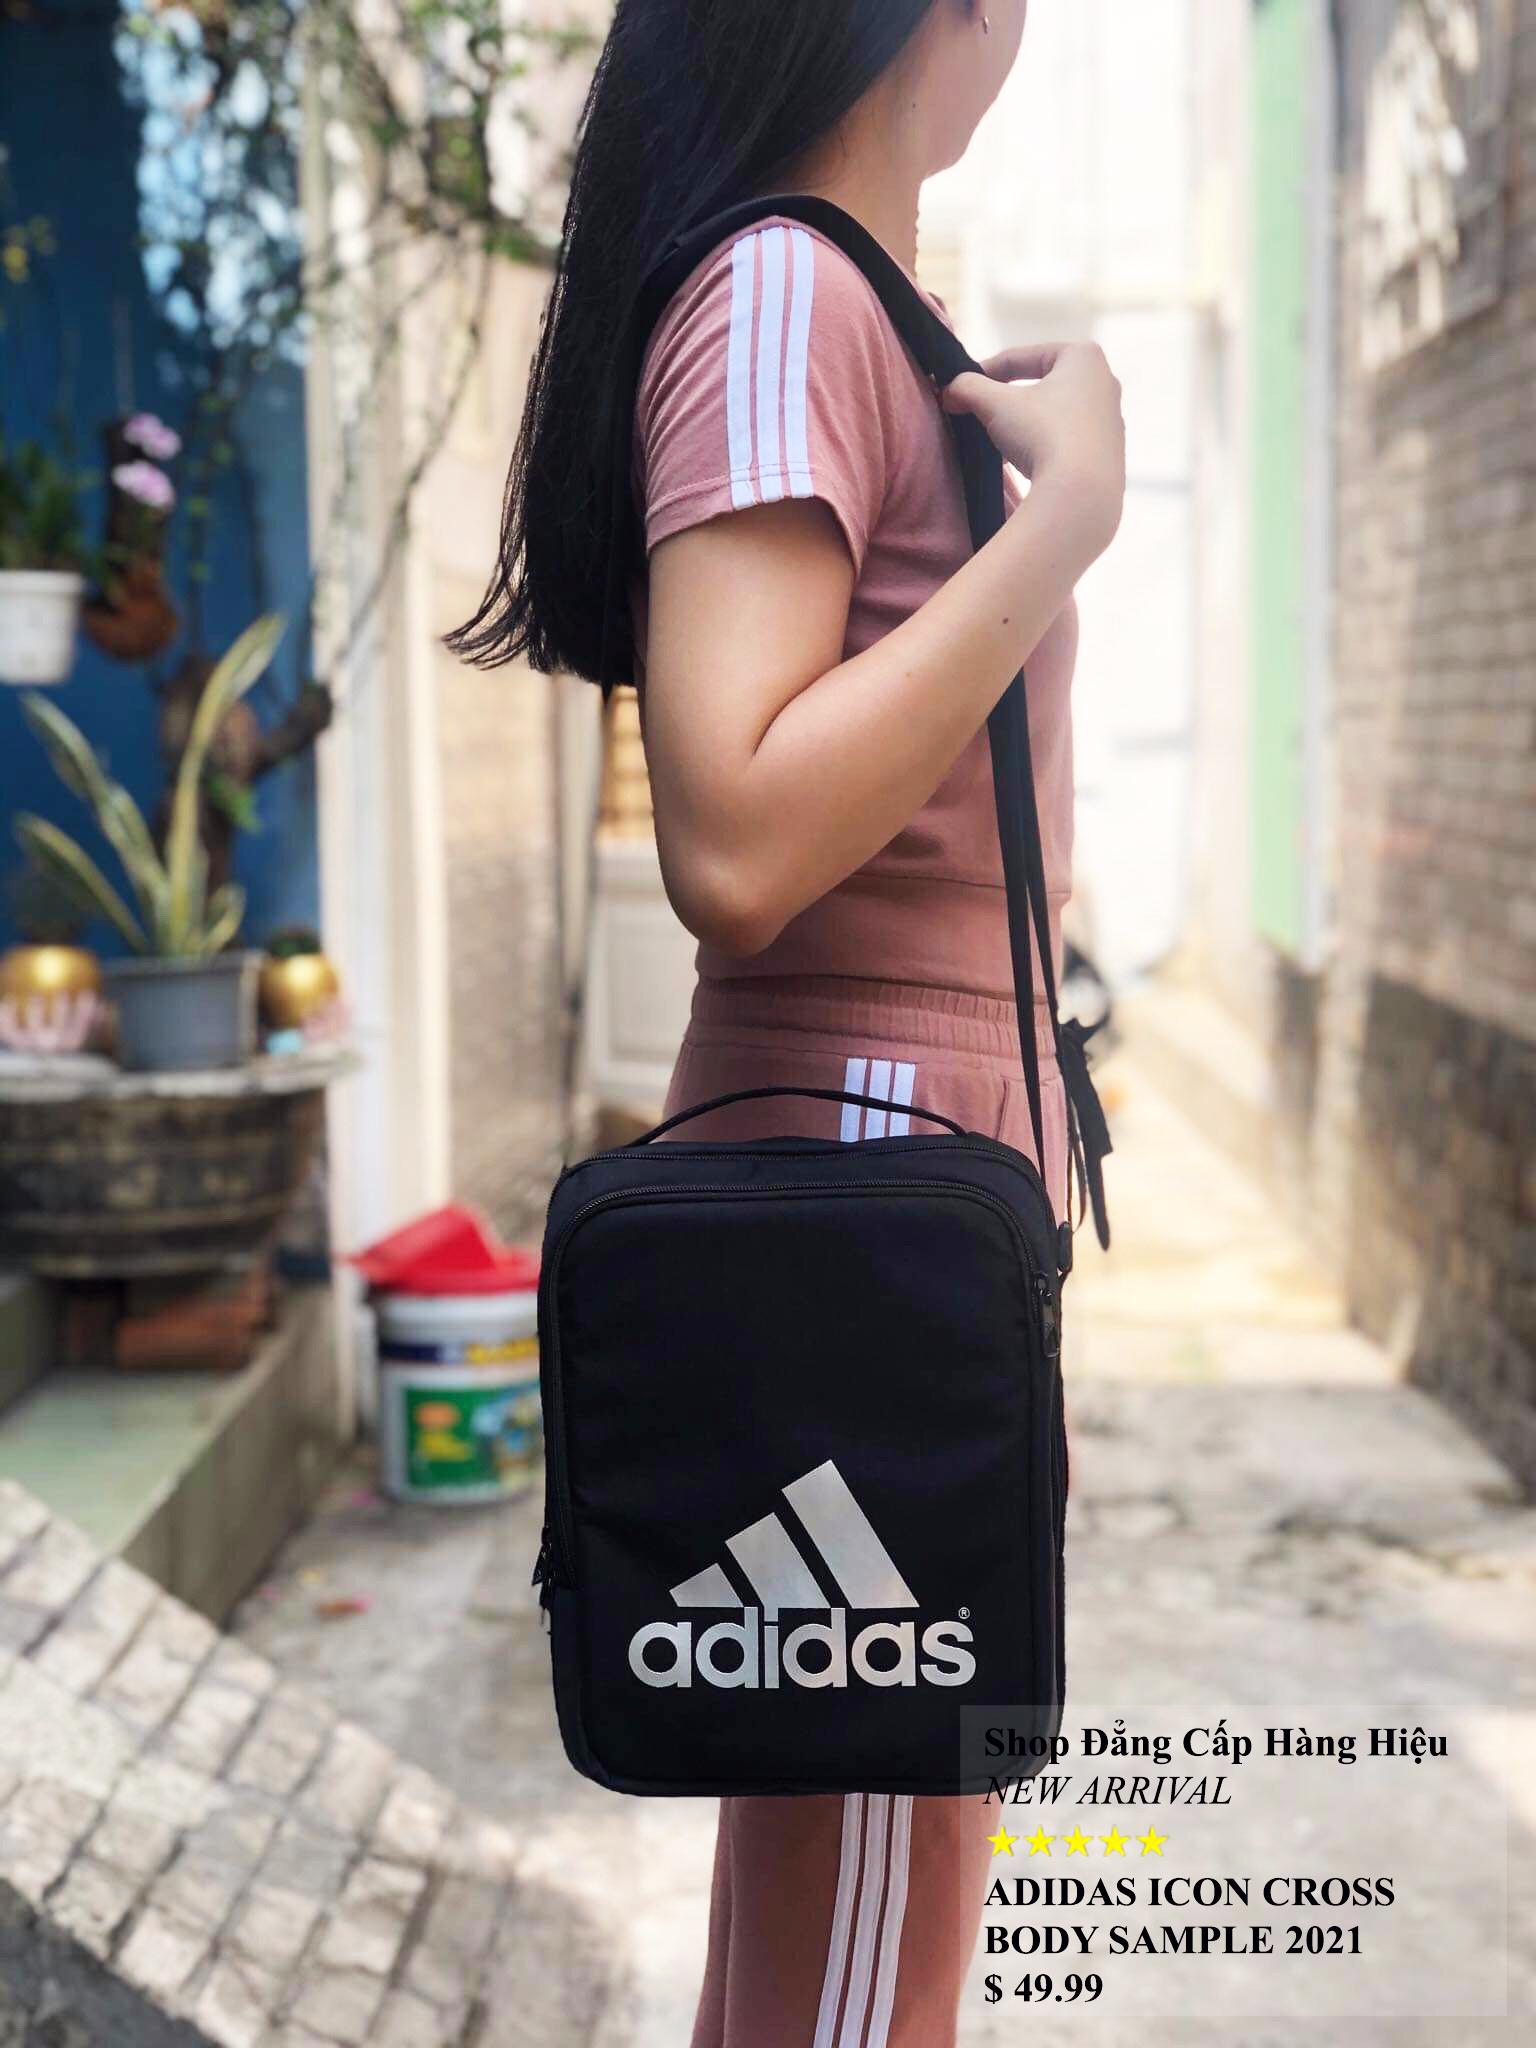 Adidas Women's Messenger Bags - Bags | Stylicy India